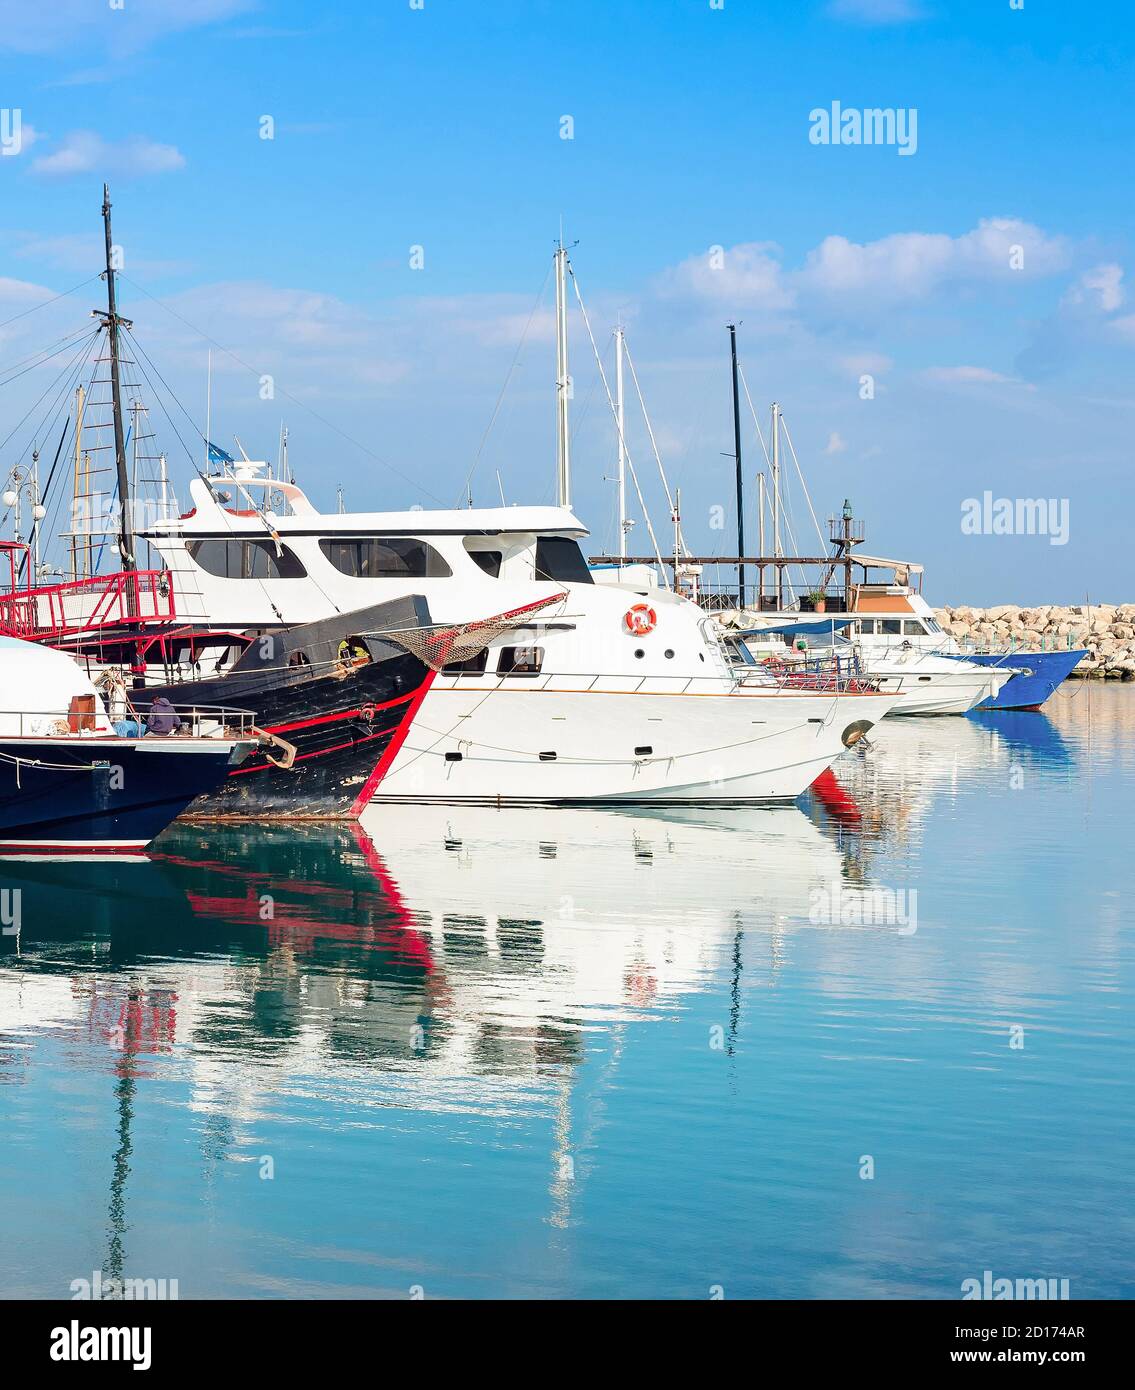 Marina with yachts and motorboats in bright sunlight, Larnaca, Cyprus Stock Photo